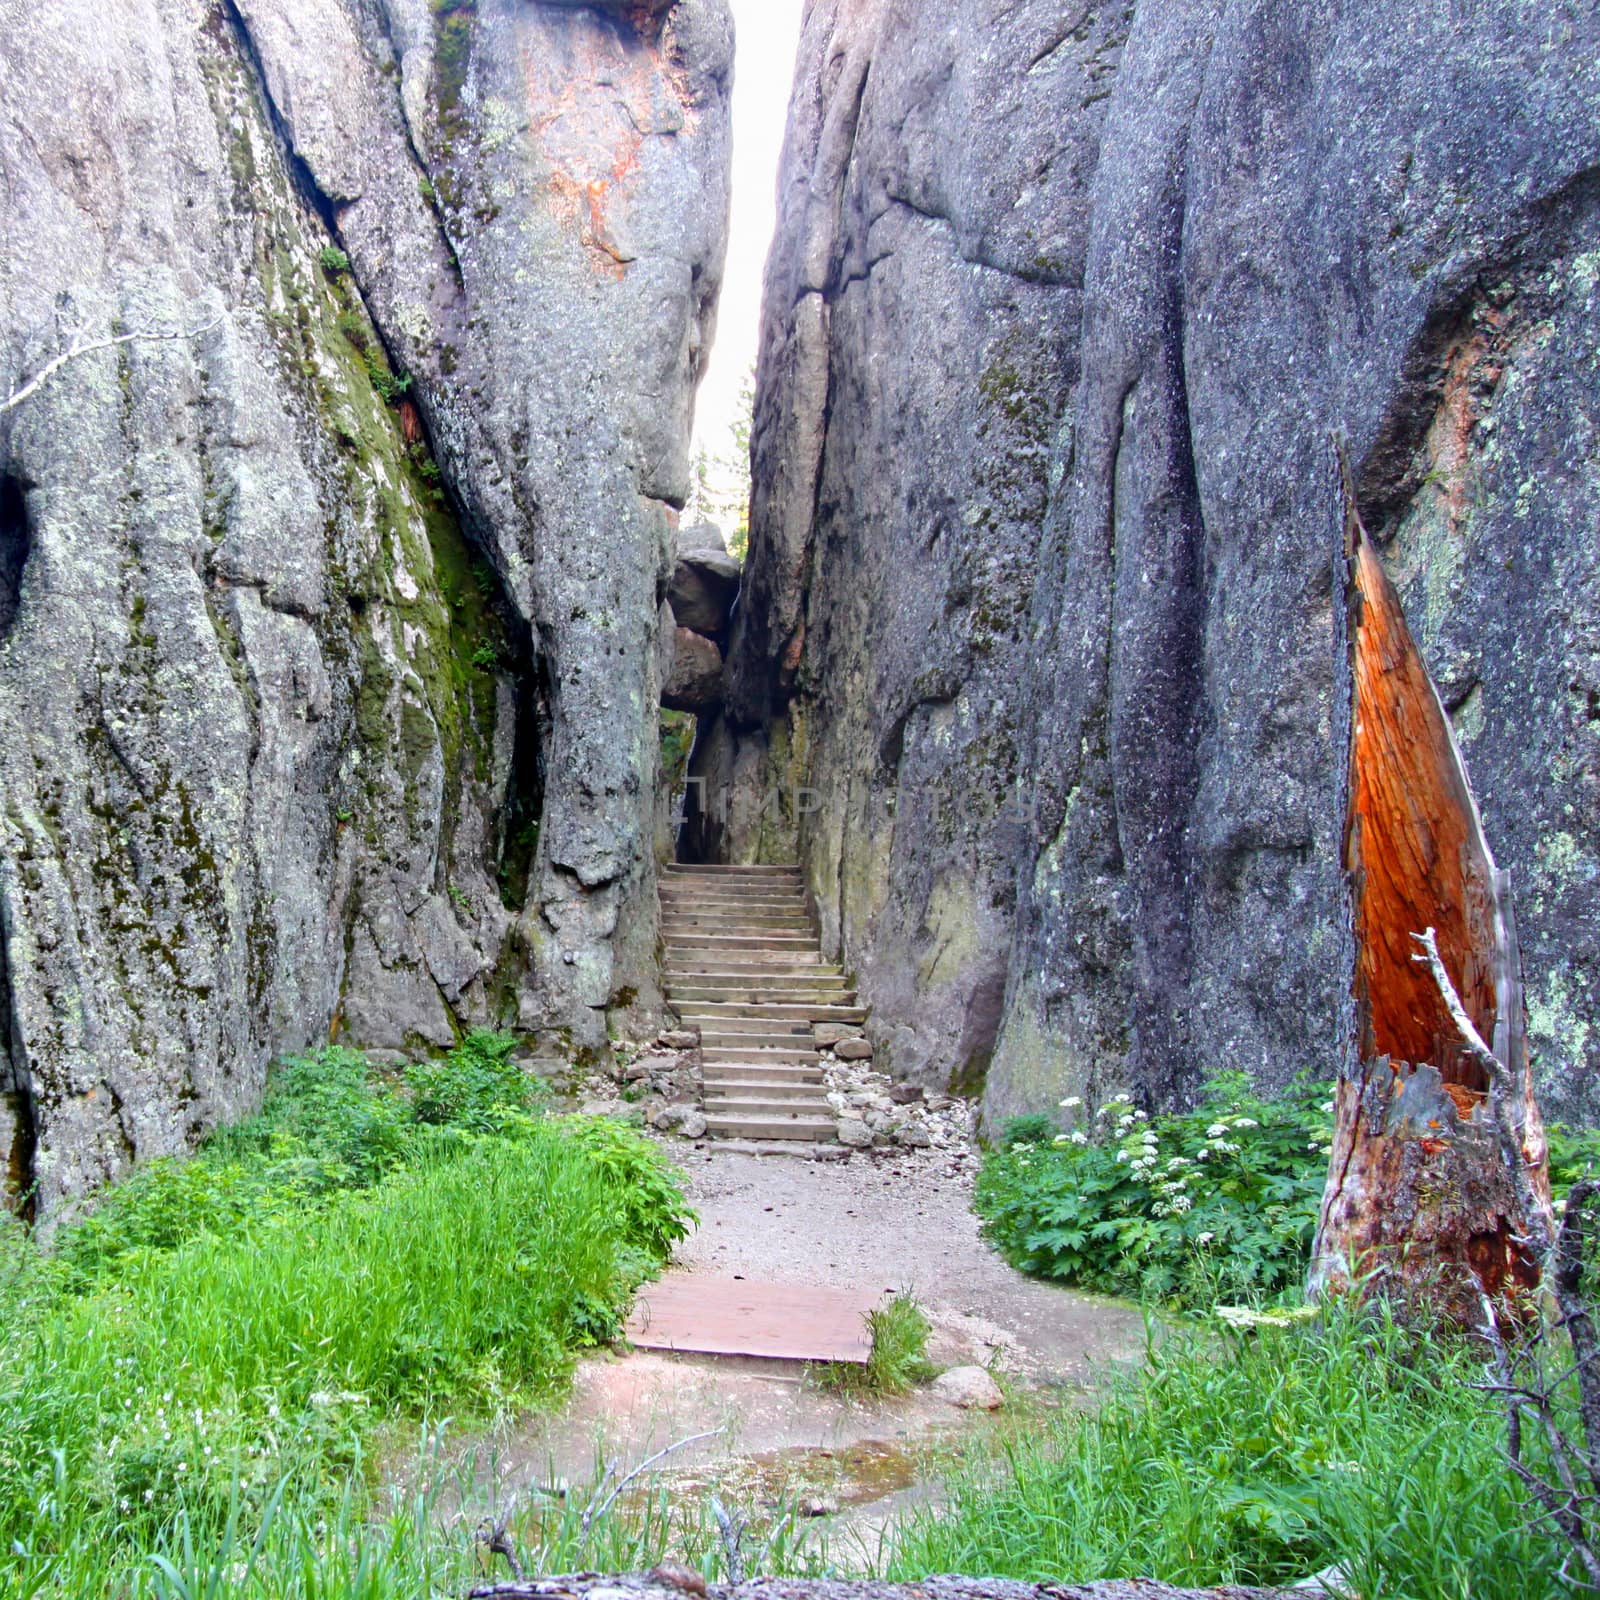 Hiking trail narrowly passes through large rocks in Custer State Park.